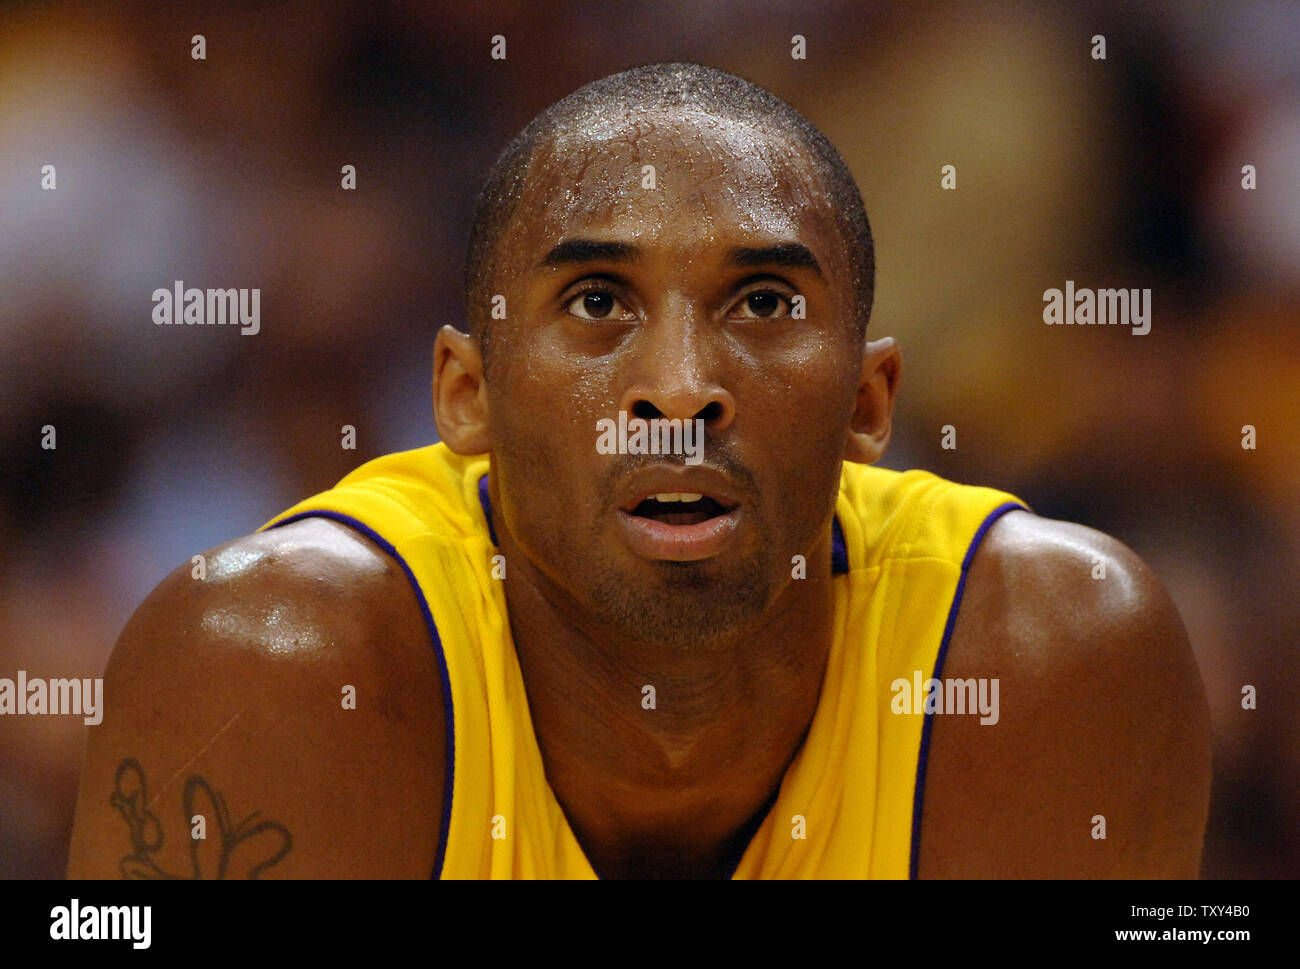 Los Angeles Lakers guard Kobe Bryant waits for the Washington Wizzards to complete their frre throws during first quarter NBA action at Staples Center in Los Angeles December 16, 2005. The Lakers defeated the Wizzards 97-91. (UPI Photo/Jim Ruymen) Stock Photo